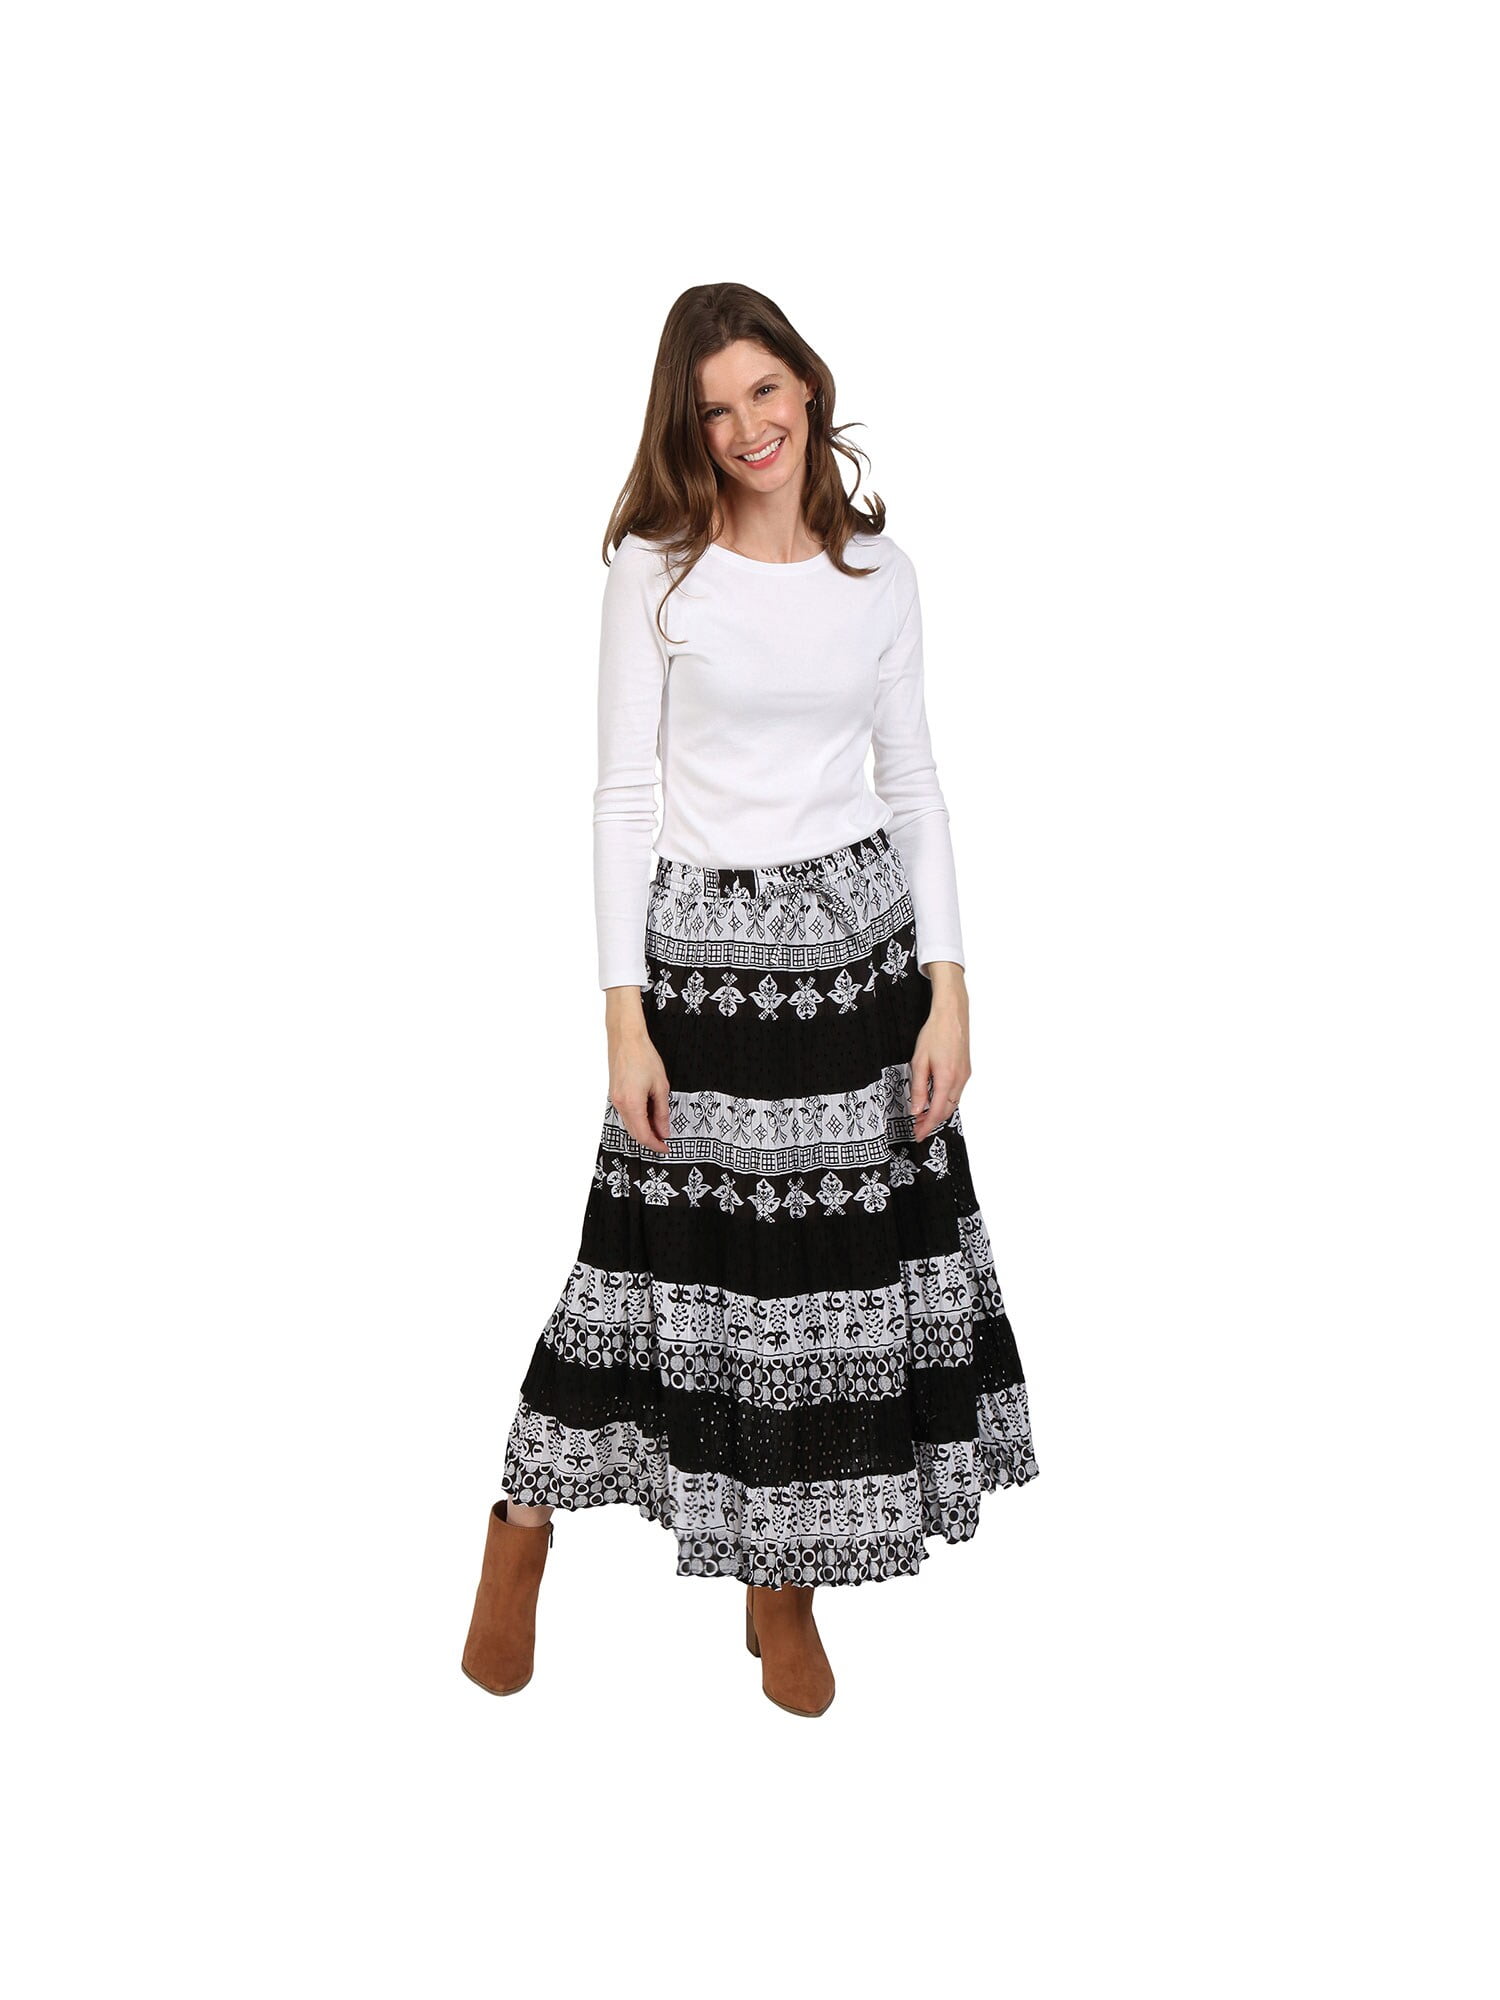 First Fashion Fly Spring and Summer New Asymmetric Waist Dress Female Round Neck Short Sleeve Long Skirt Gray